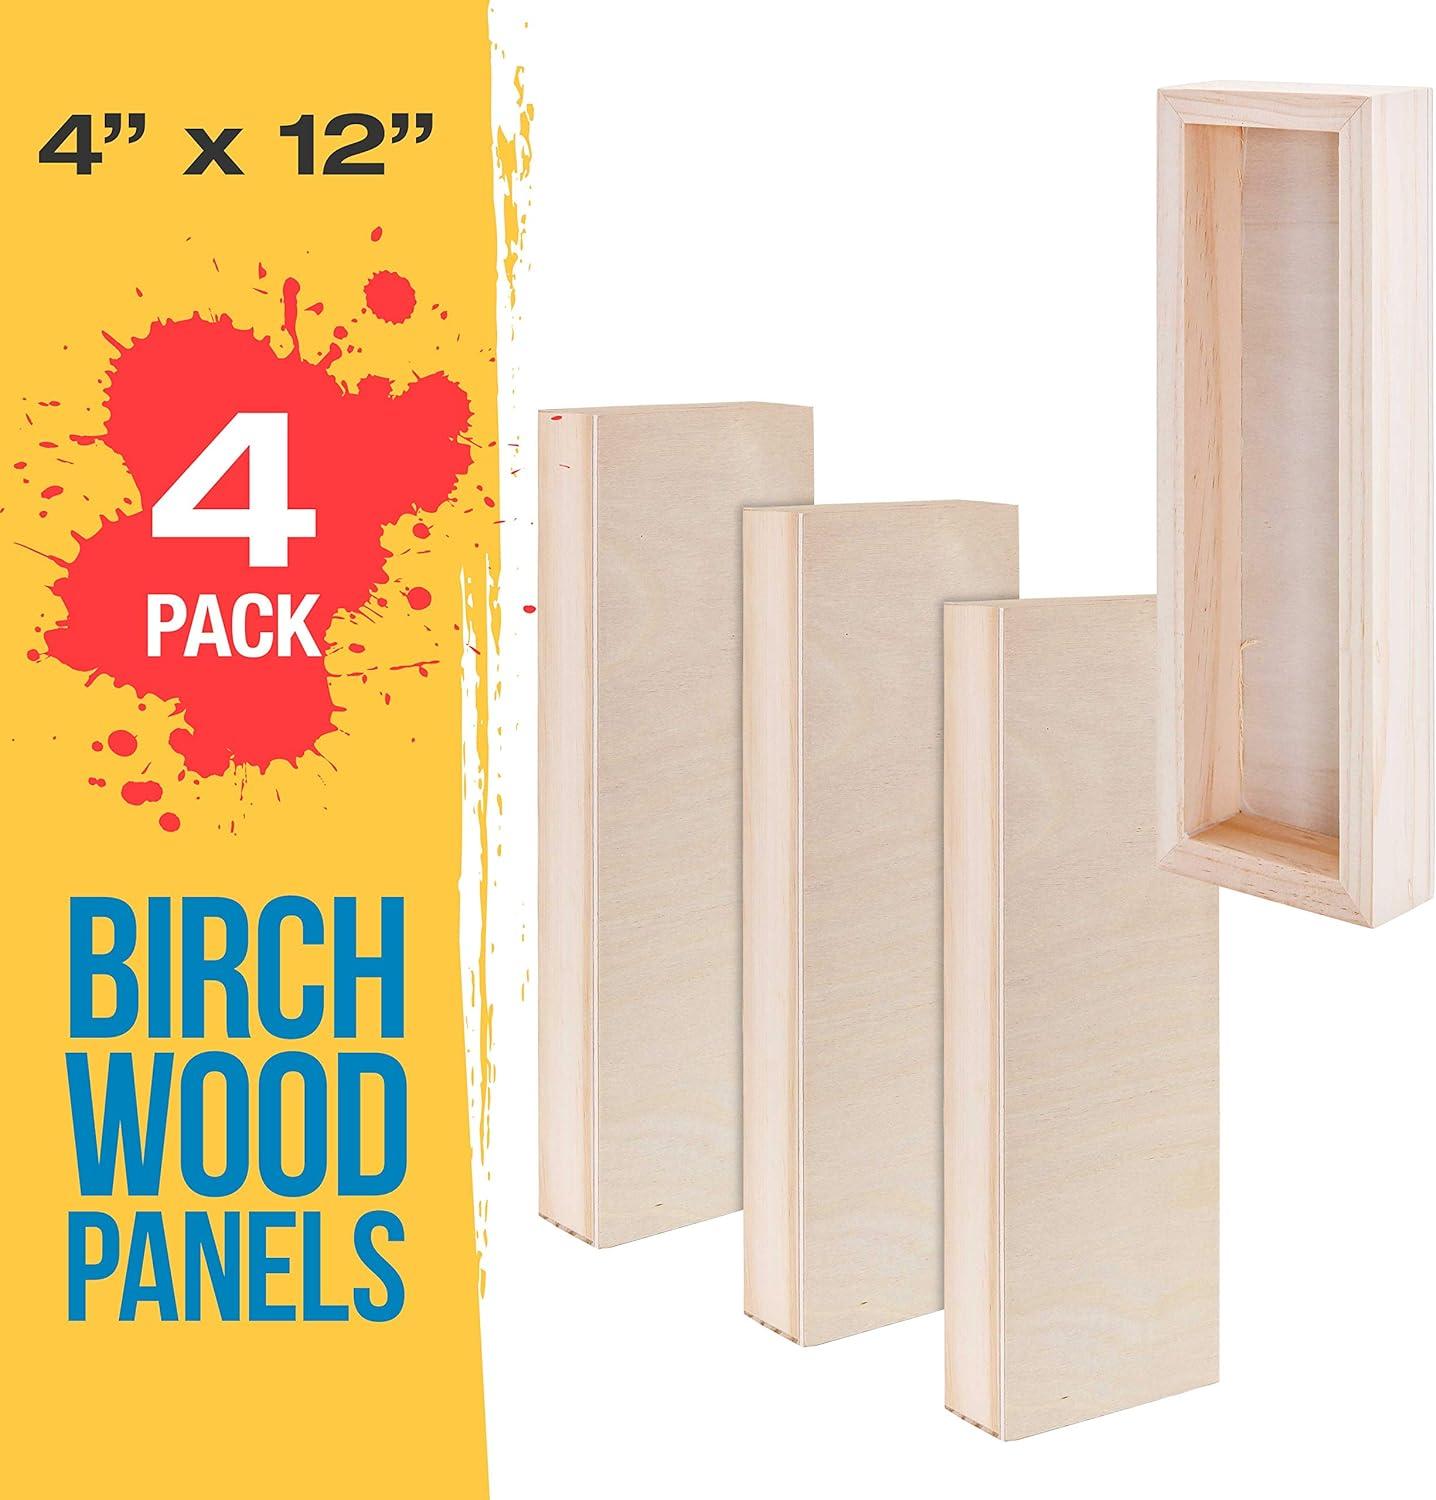 U.S. Art Supply 12 x 12 Birch Wood Paint Pouring Panel Boards, Gallery 1-1/2 Deep Cradle (Pack of 3) - Artist Depth Wooden Wall Canvases - Painting